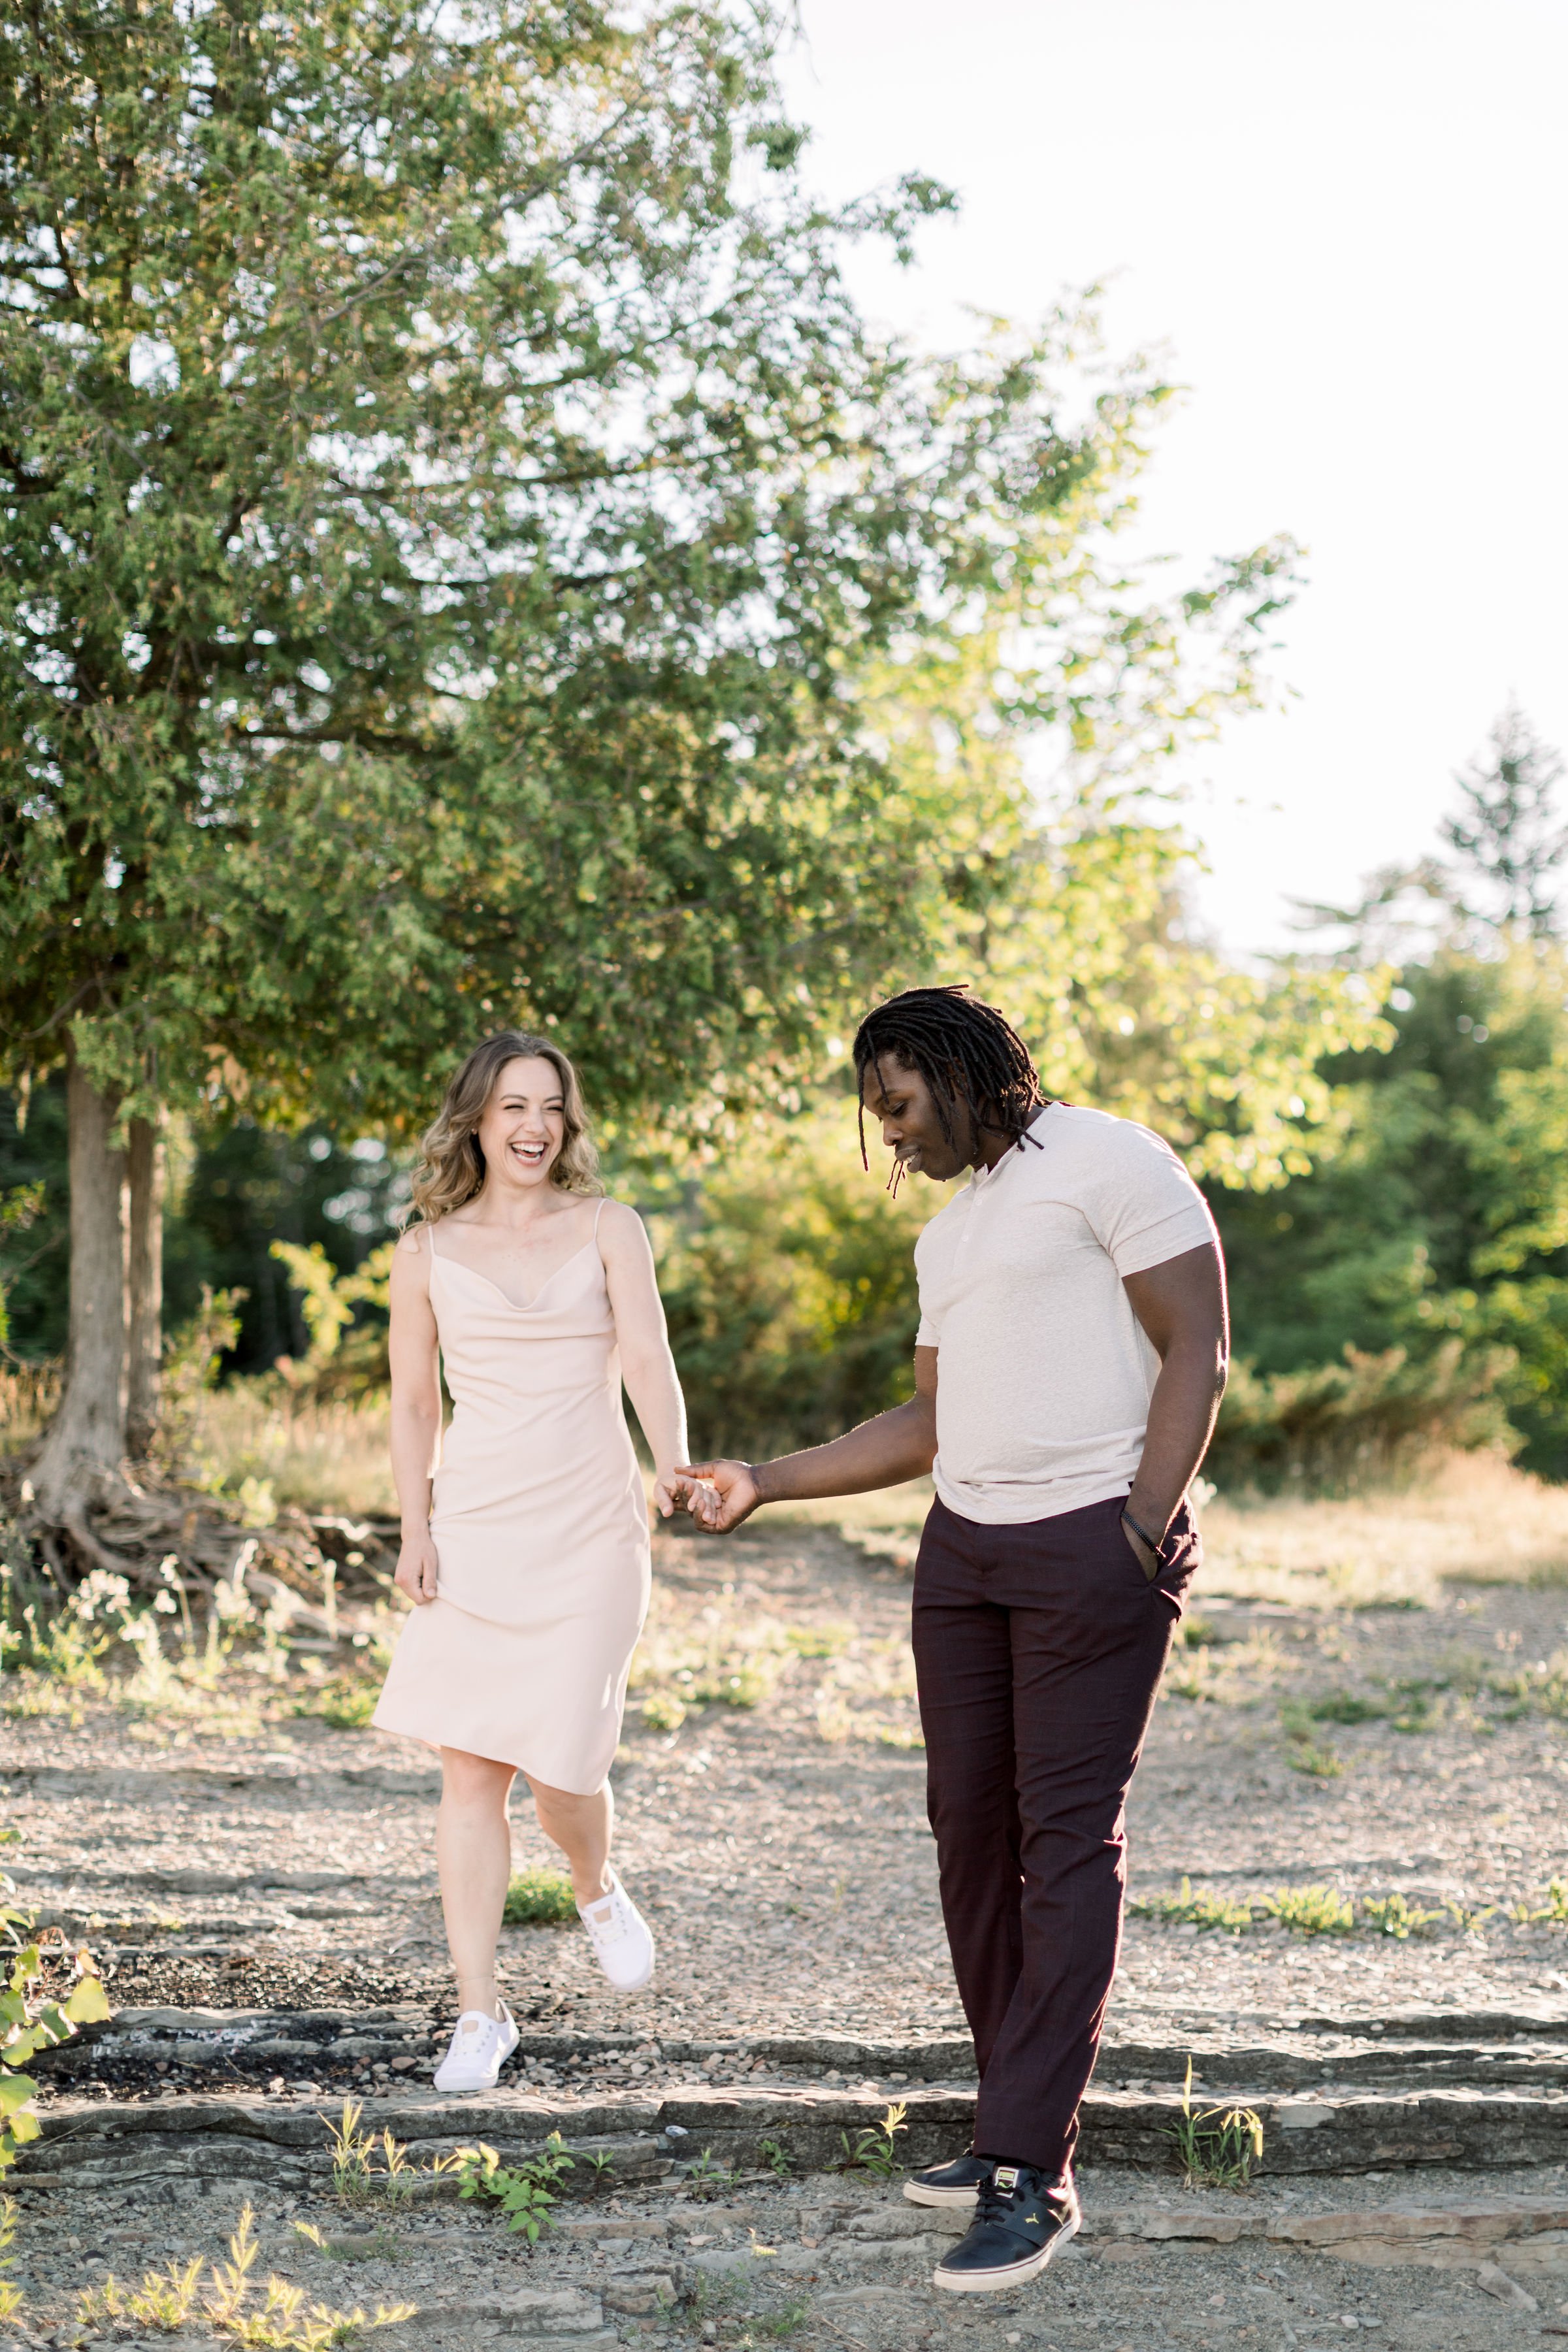  A boyfriend in a white t-shirt helps his girlfriend down some stairs by Chelsea Mason Photography. casual engagement style ideas #Chelseamasonphotography #Chelseamasonengagements #Onatarioengagements #Pinhey'sPoint #Ontarioweddingphotographers 